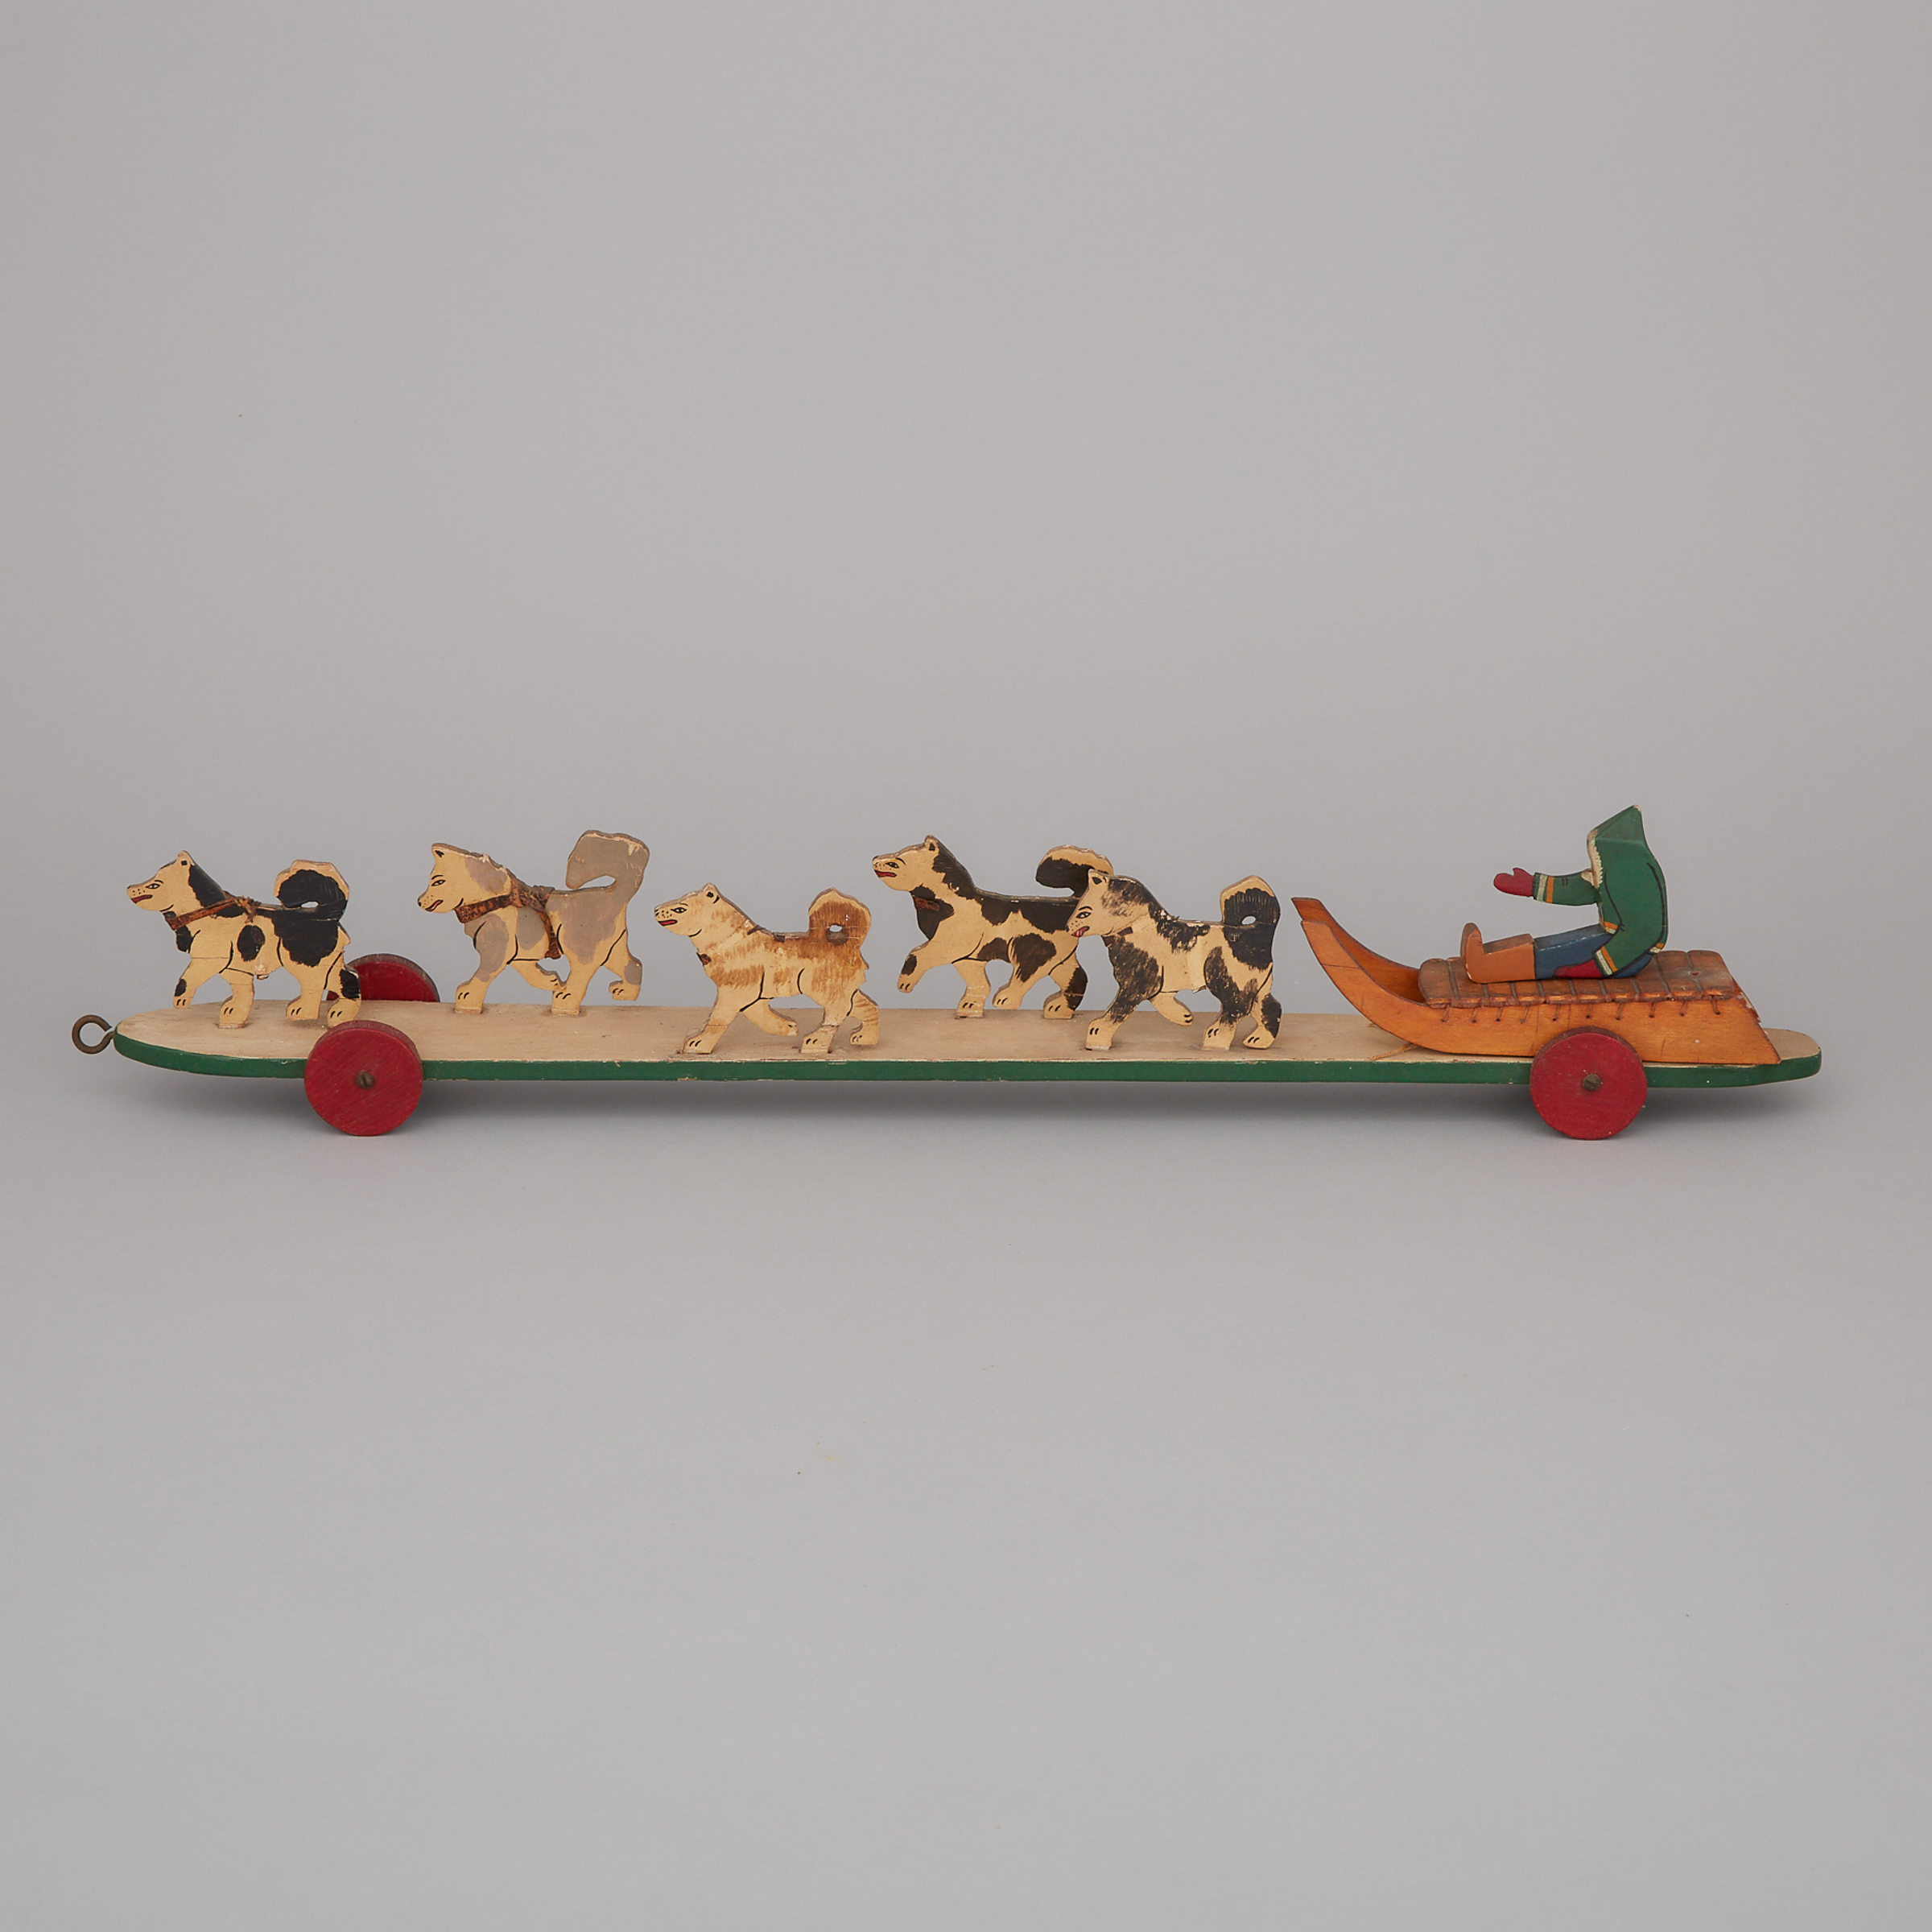 Grenfell Labrador Industries Painted Wood Model Dog Sled Team Pull Toy, c.1930